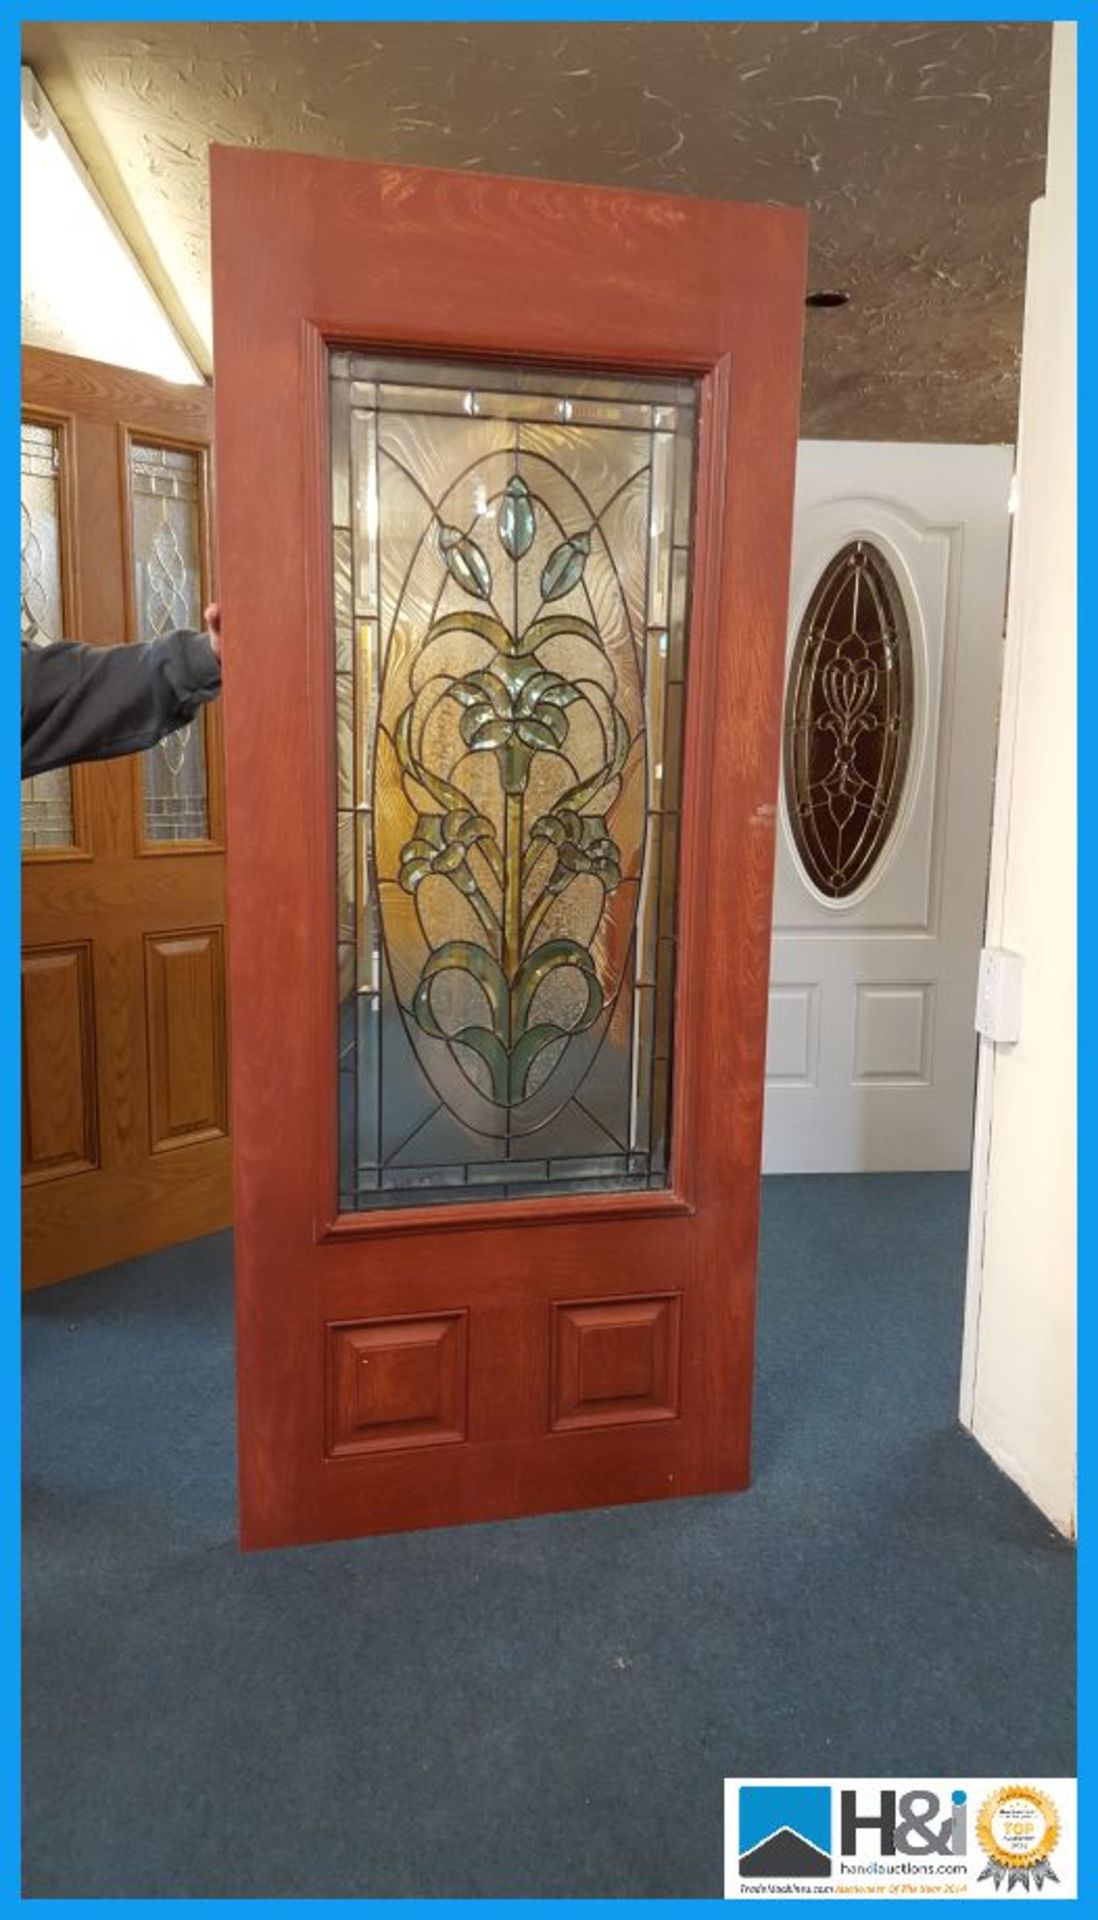 NBL Fibreglass exterior entrance door with genuine leaded, triple glazing. Size: 79 x 33 inch.